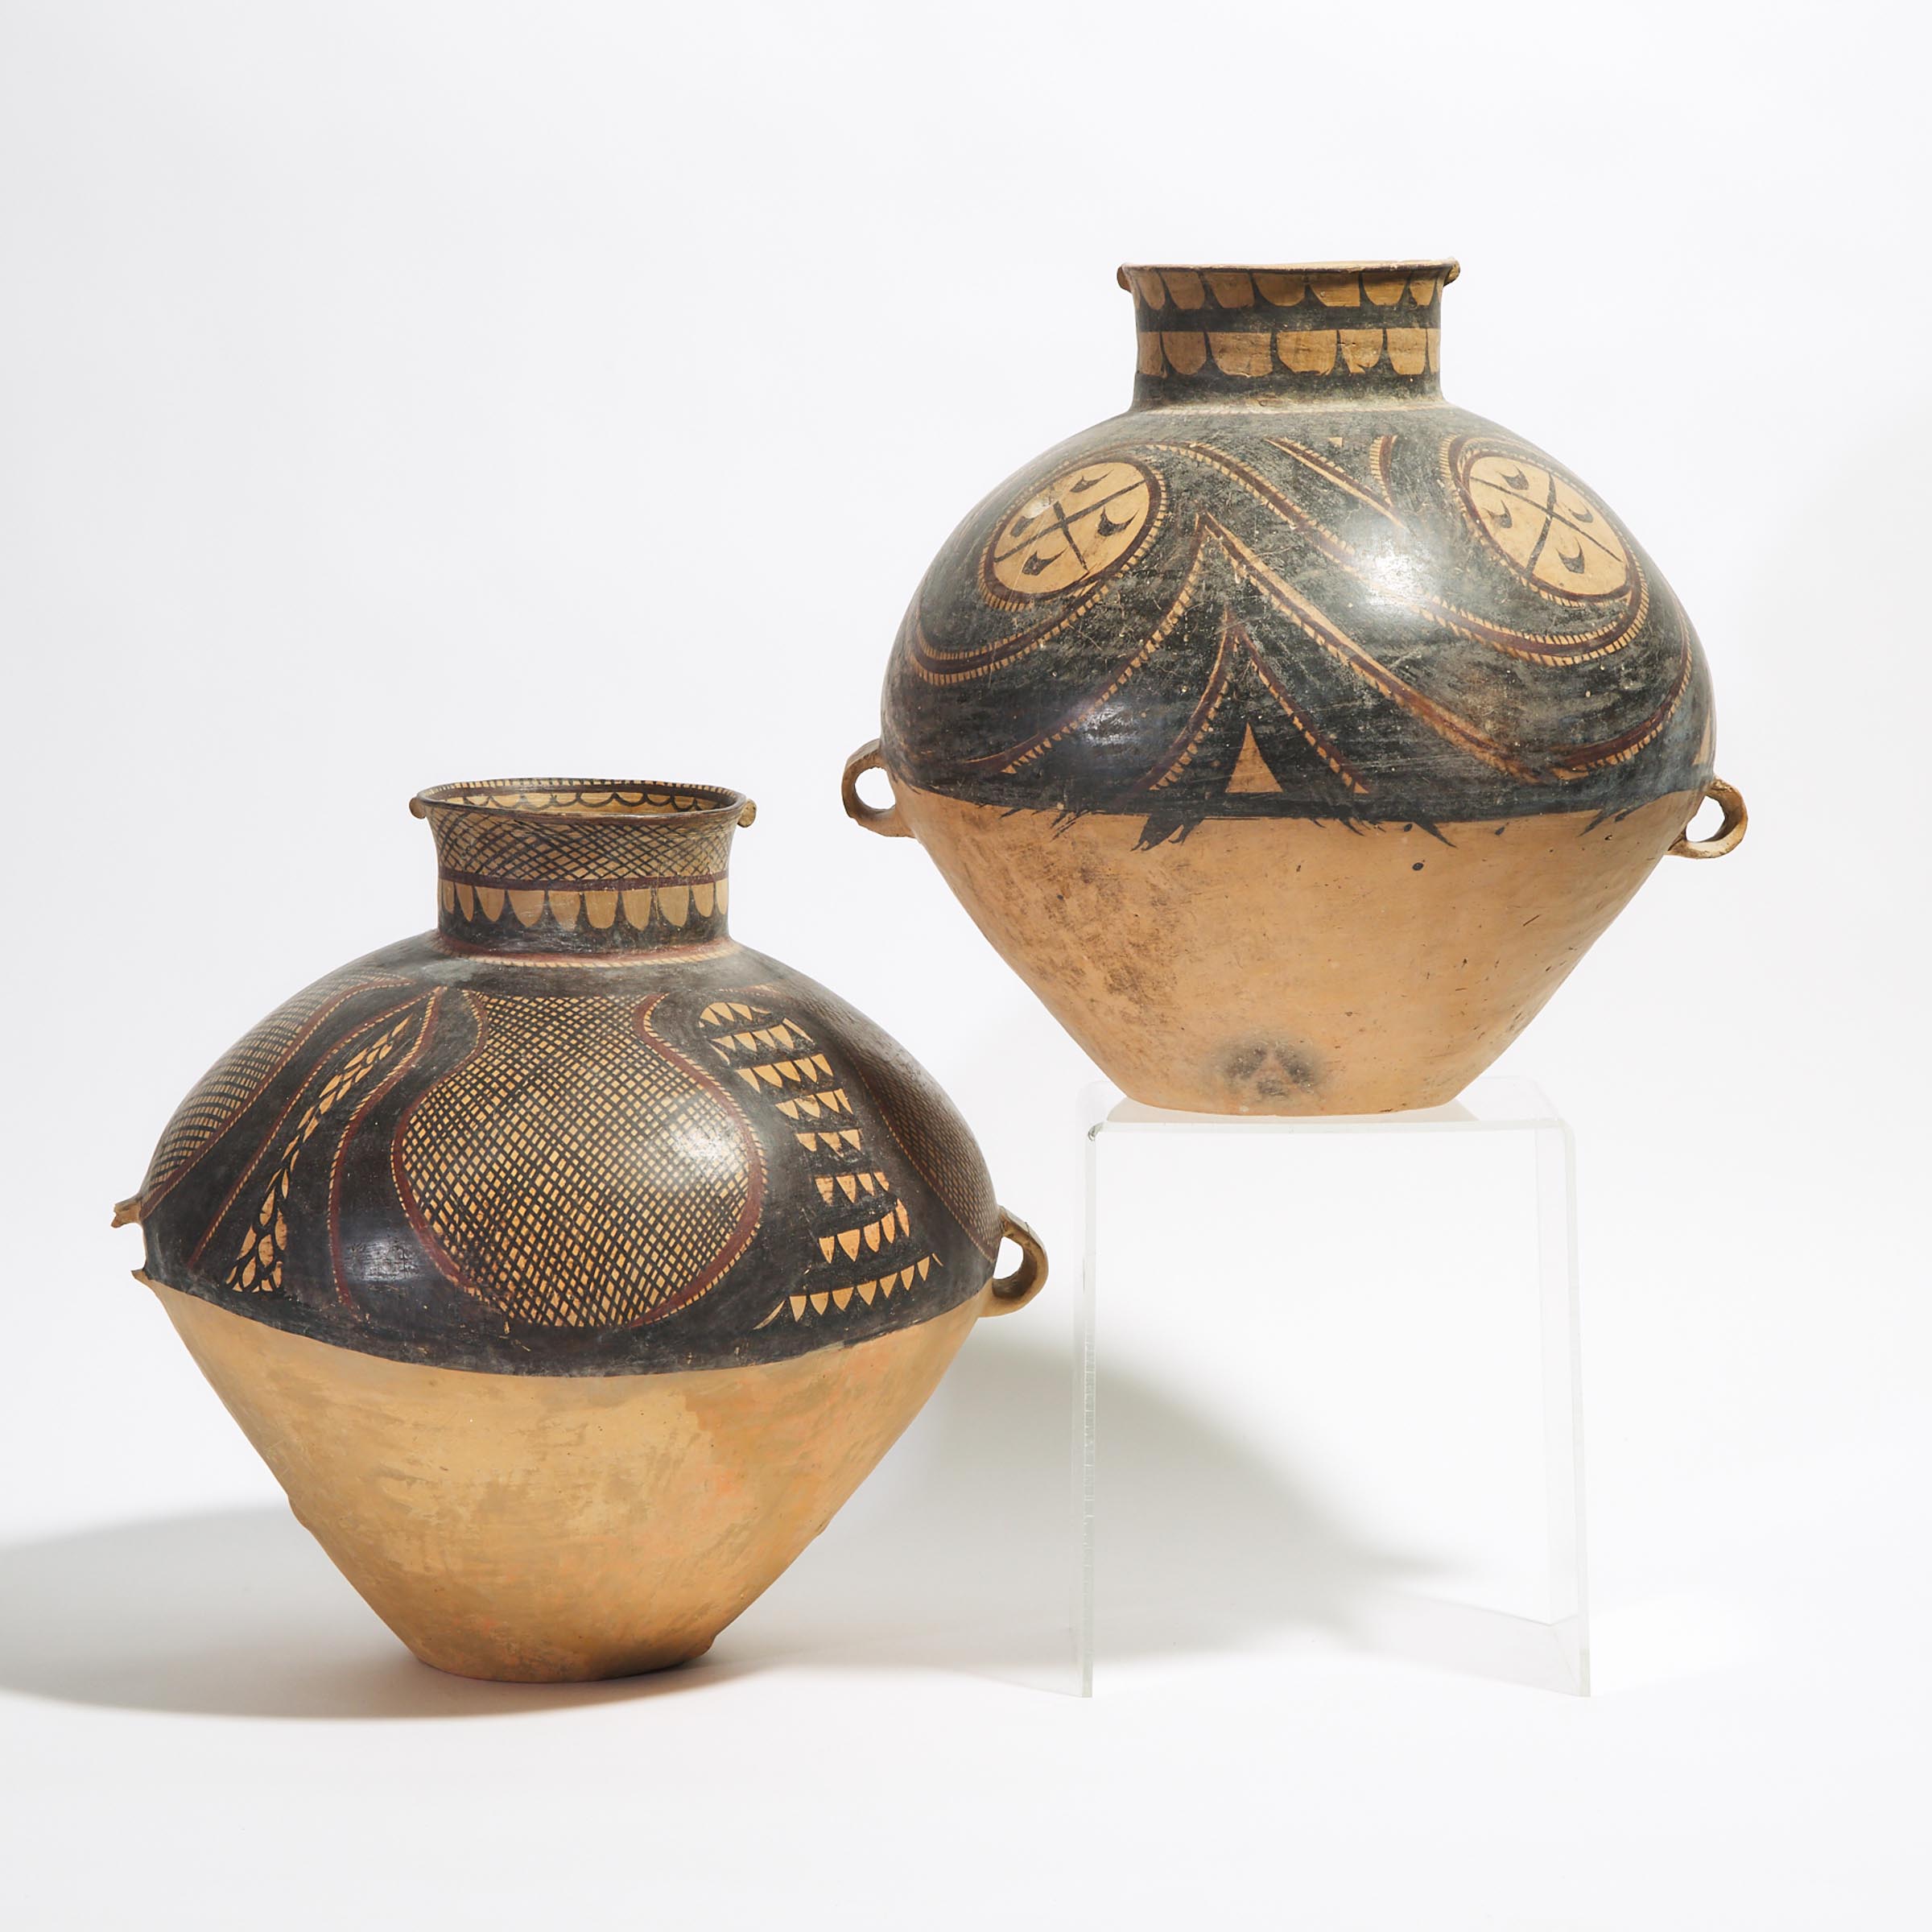 Two Large Painted Pottery Jars, Majiayao Culture, Banshan Phase, Neolithic Period, 3rd Millennium BC